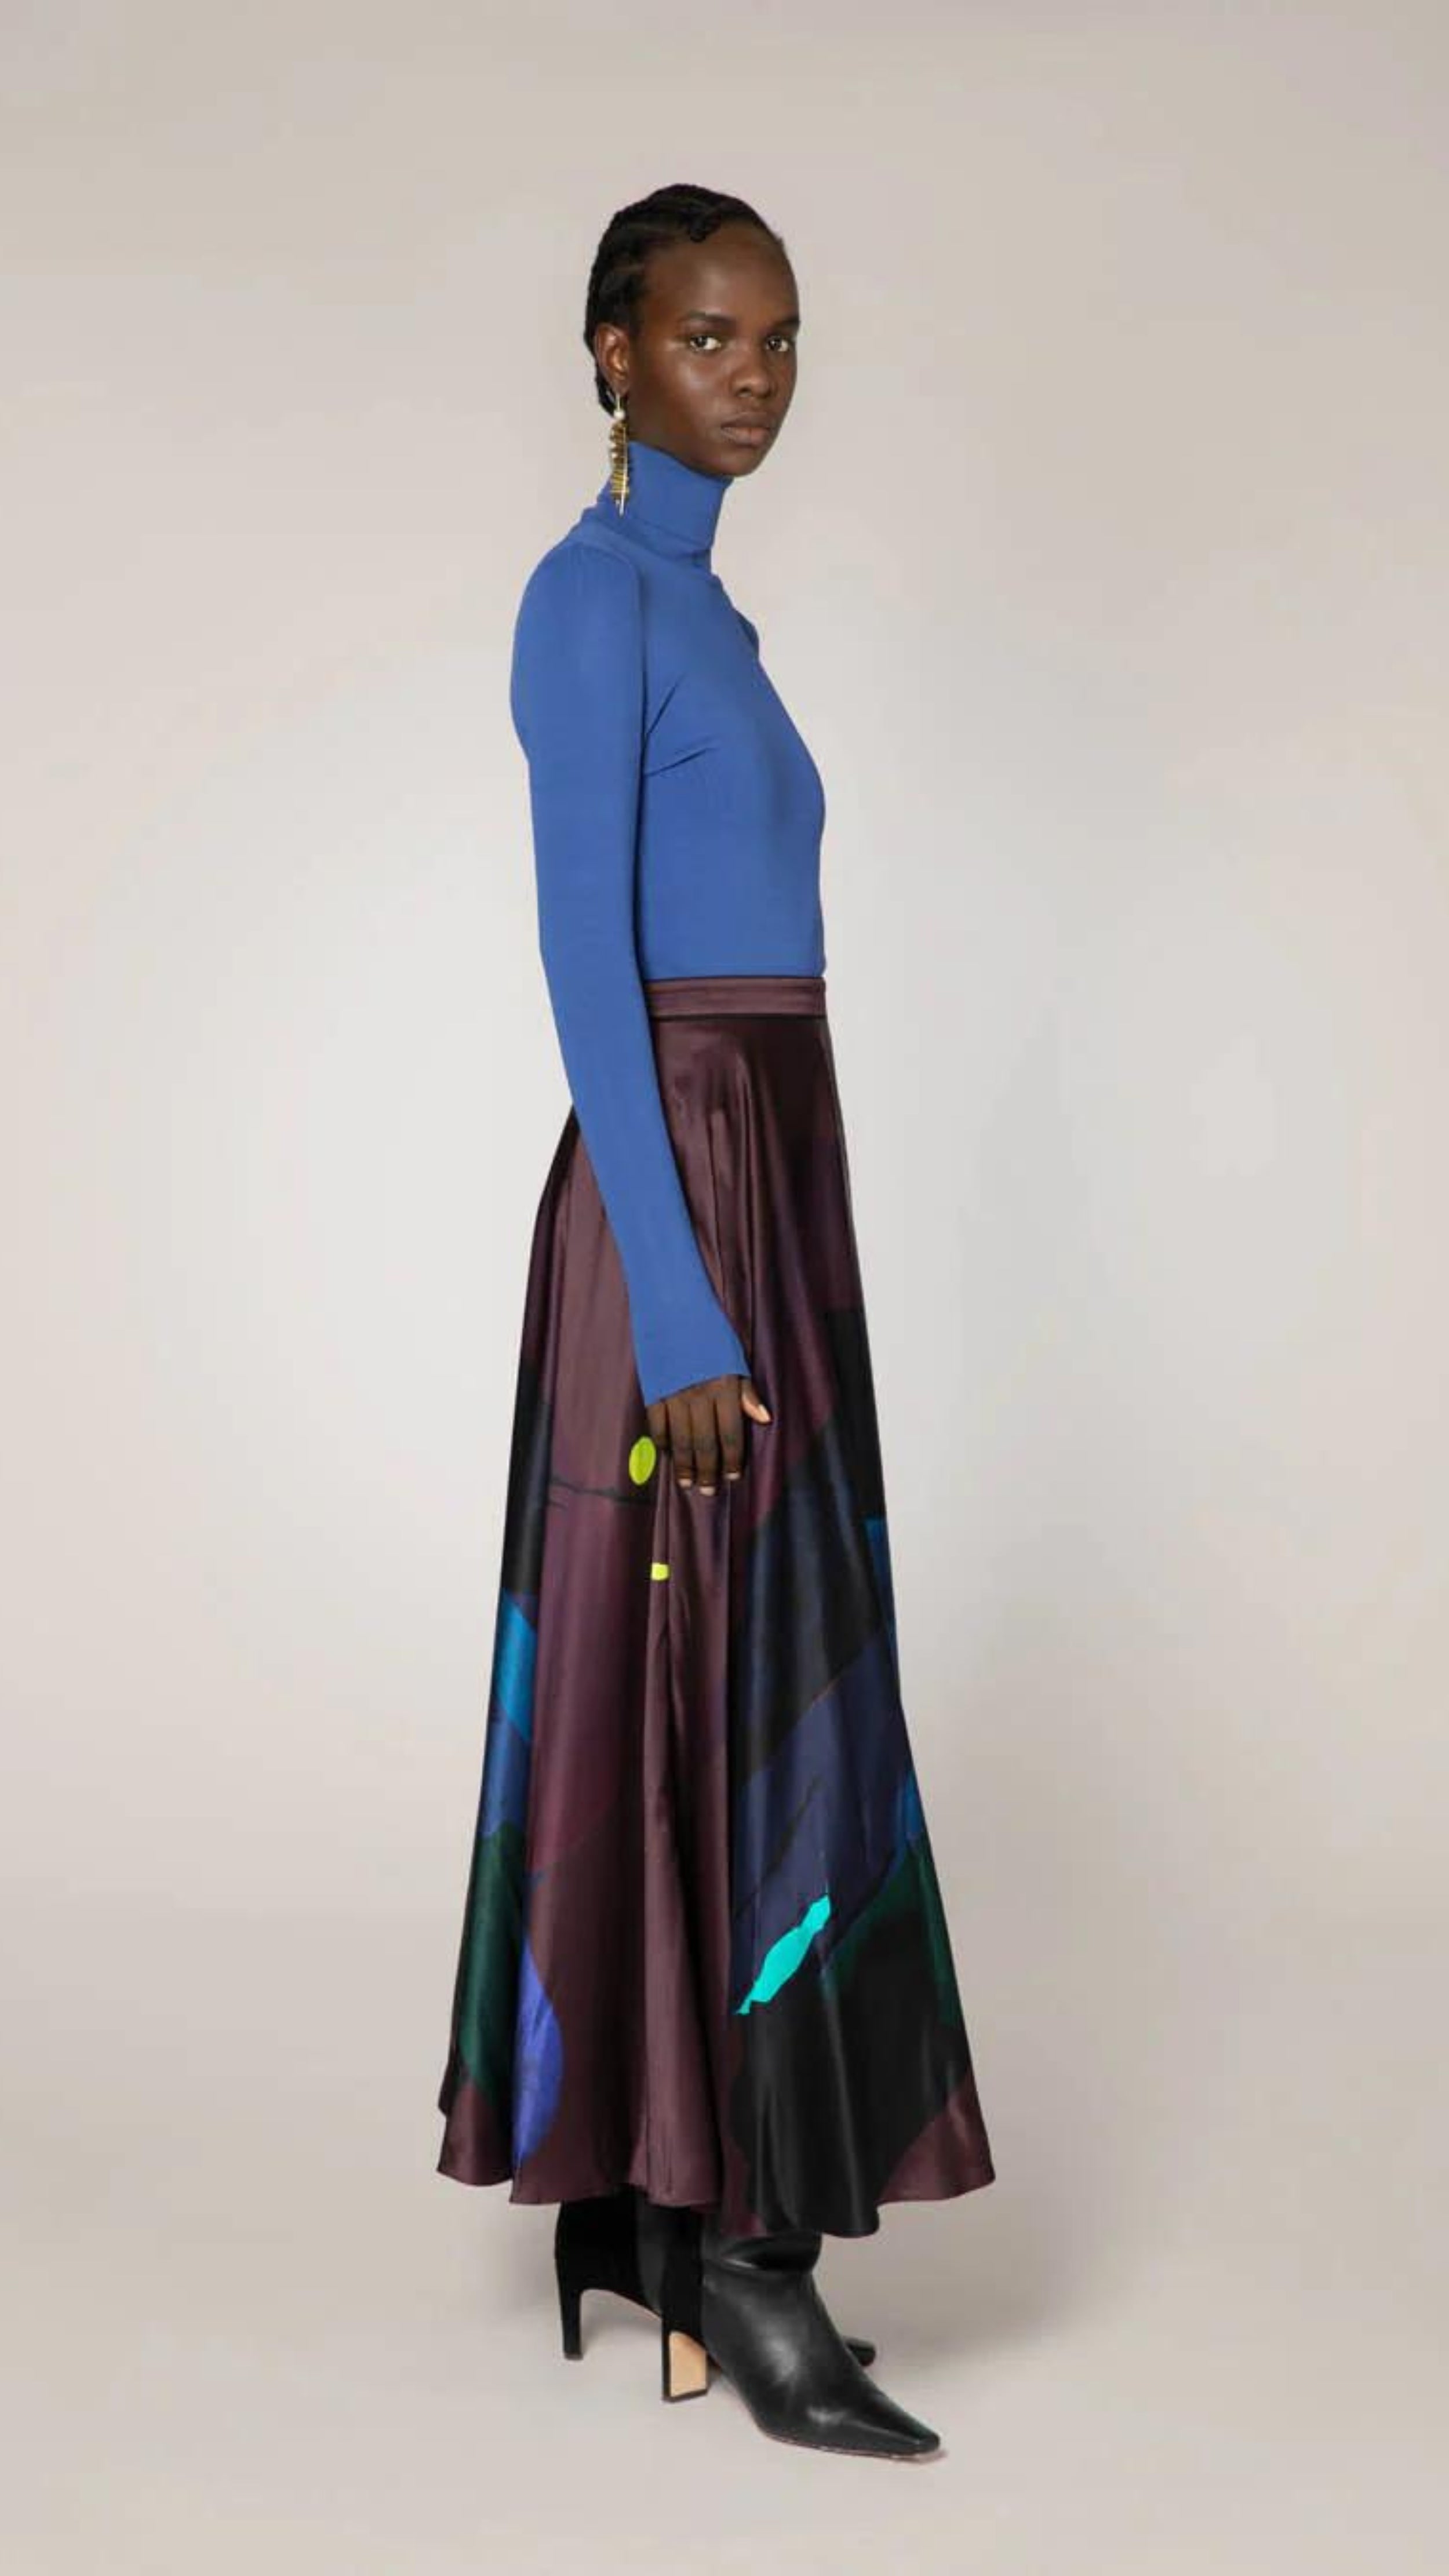 Roksanda Ameera Skirt in silk. Organic painted pattern of rich plum, blue and green colors. With a fitted band waist and hidden back zipper. This is a floor length skirt. Skirt shown on the model facing to the side